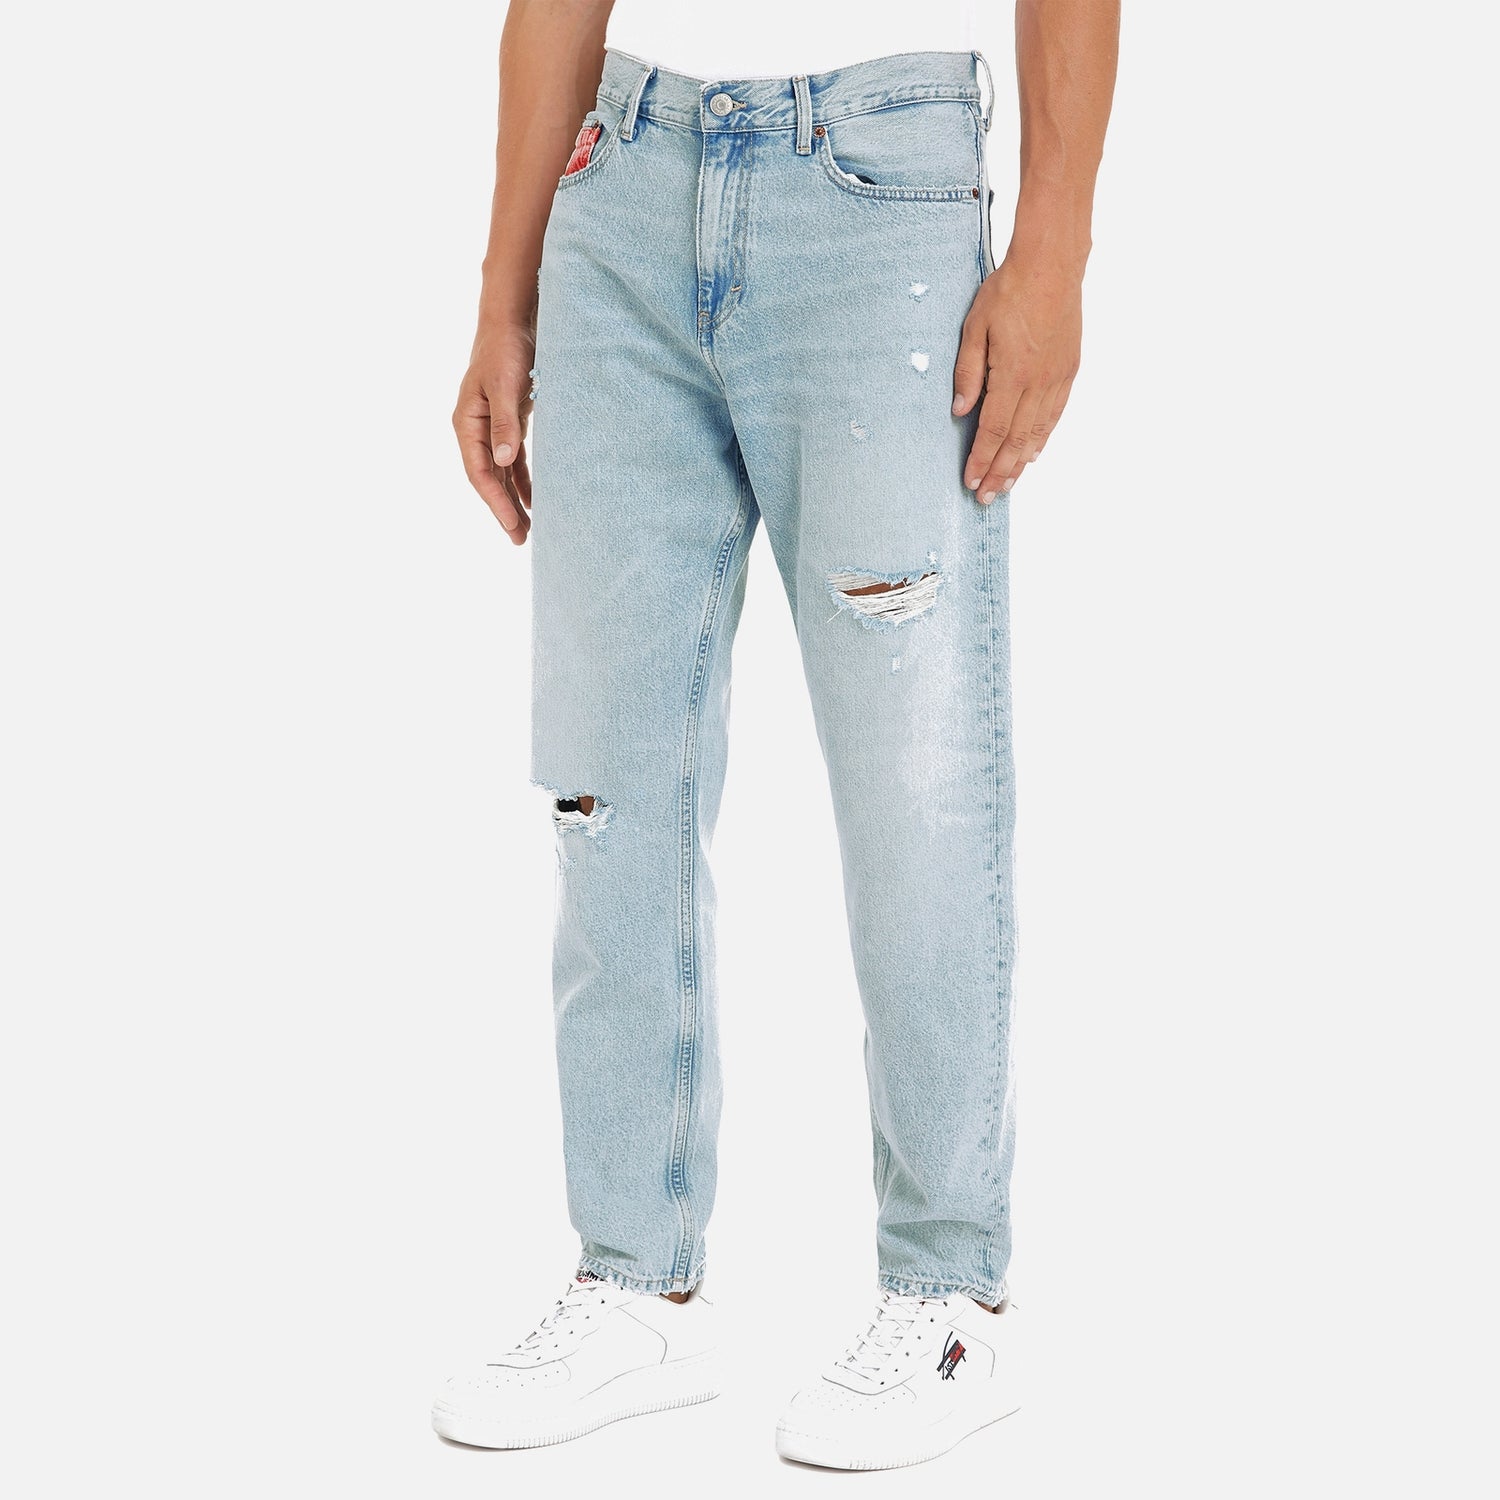 Tommy Jeans Isaac Archive Denim Jeans - W34/L32